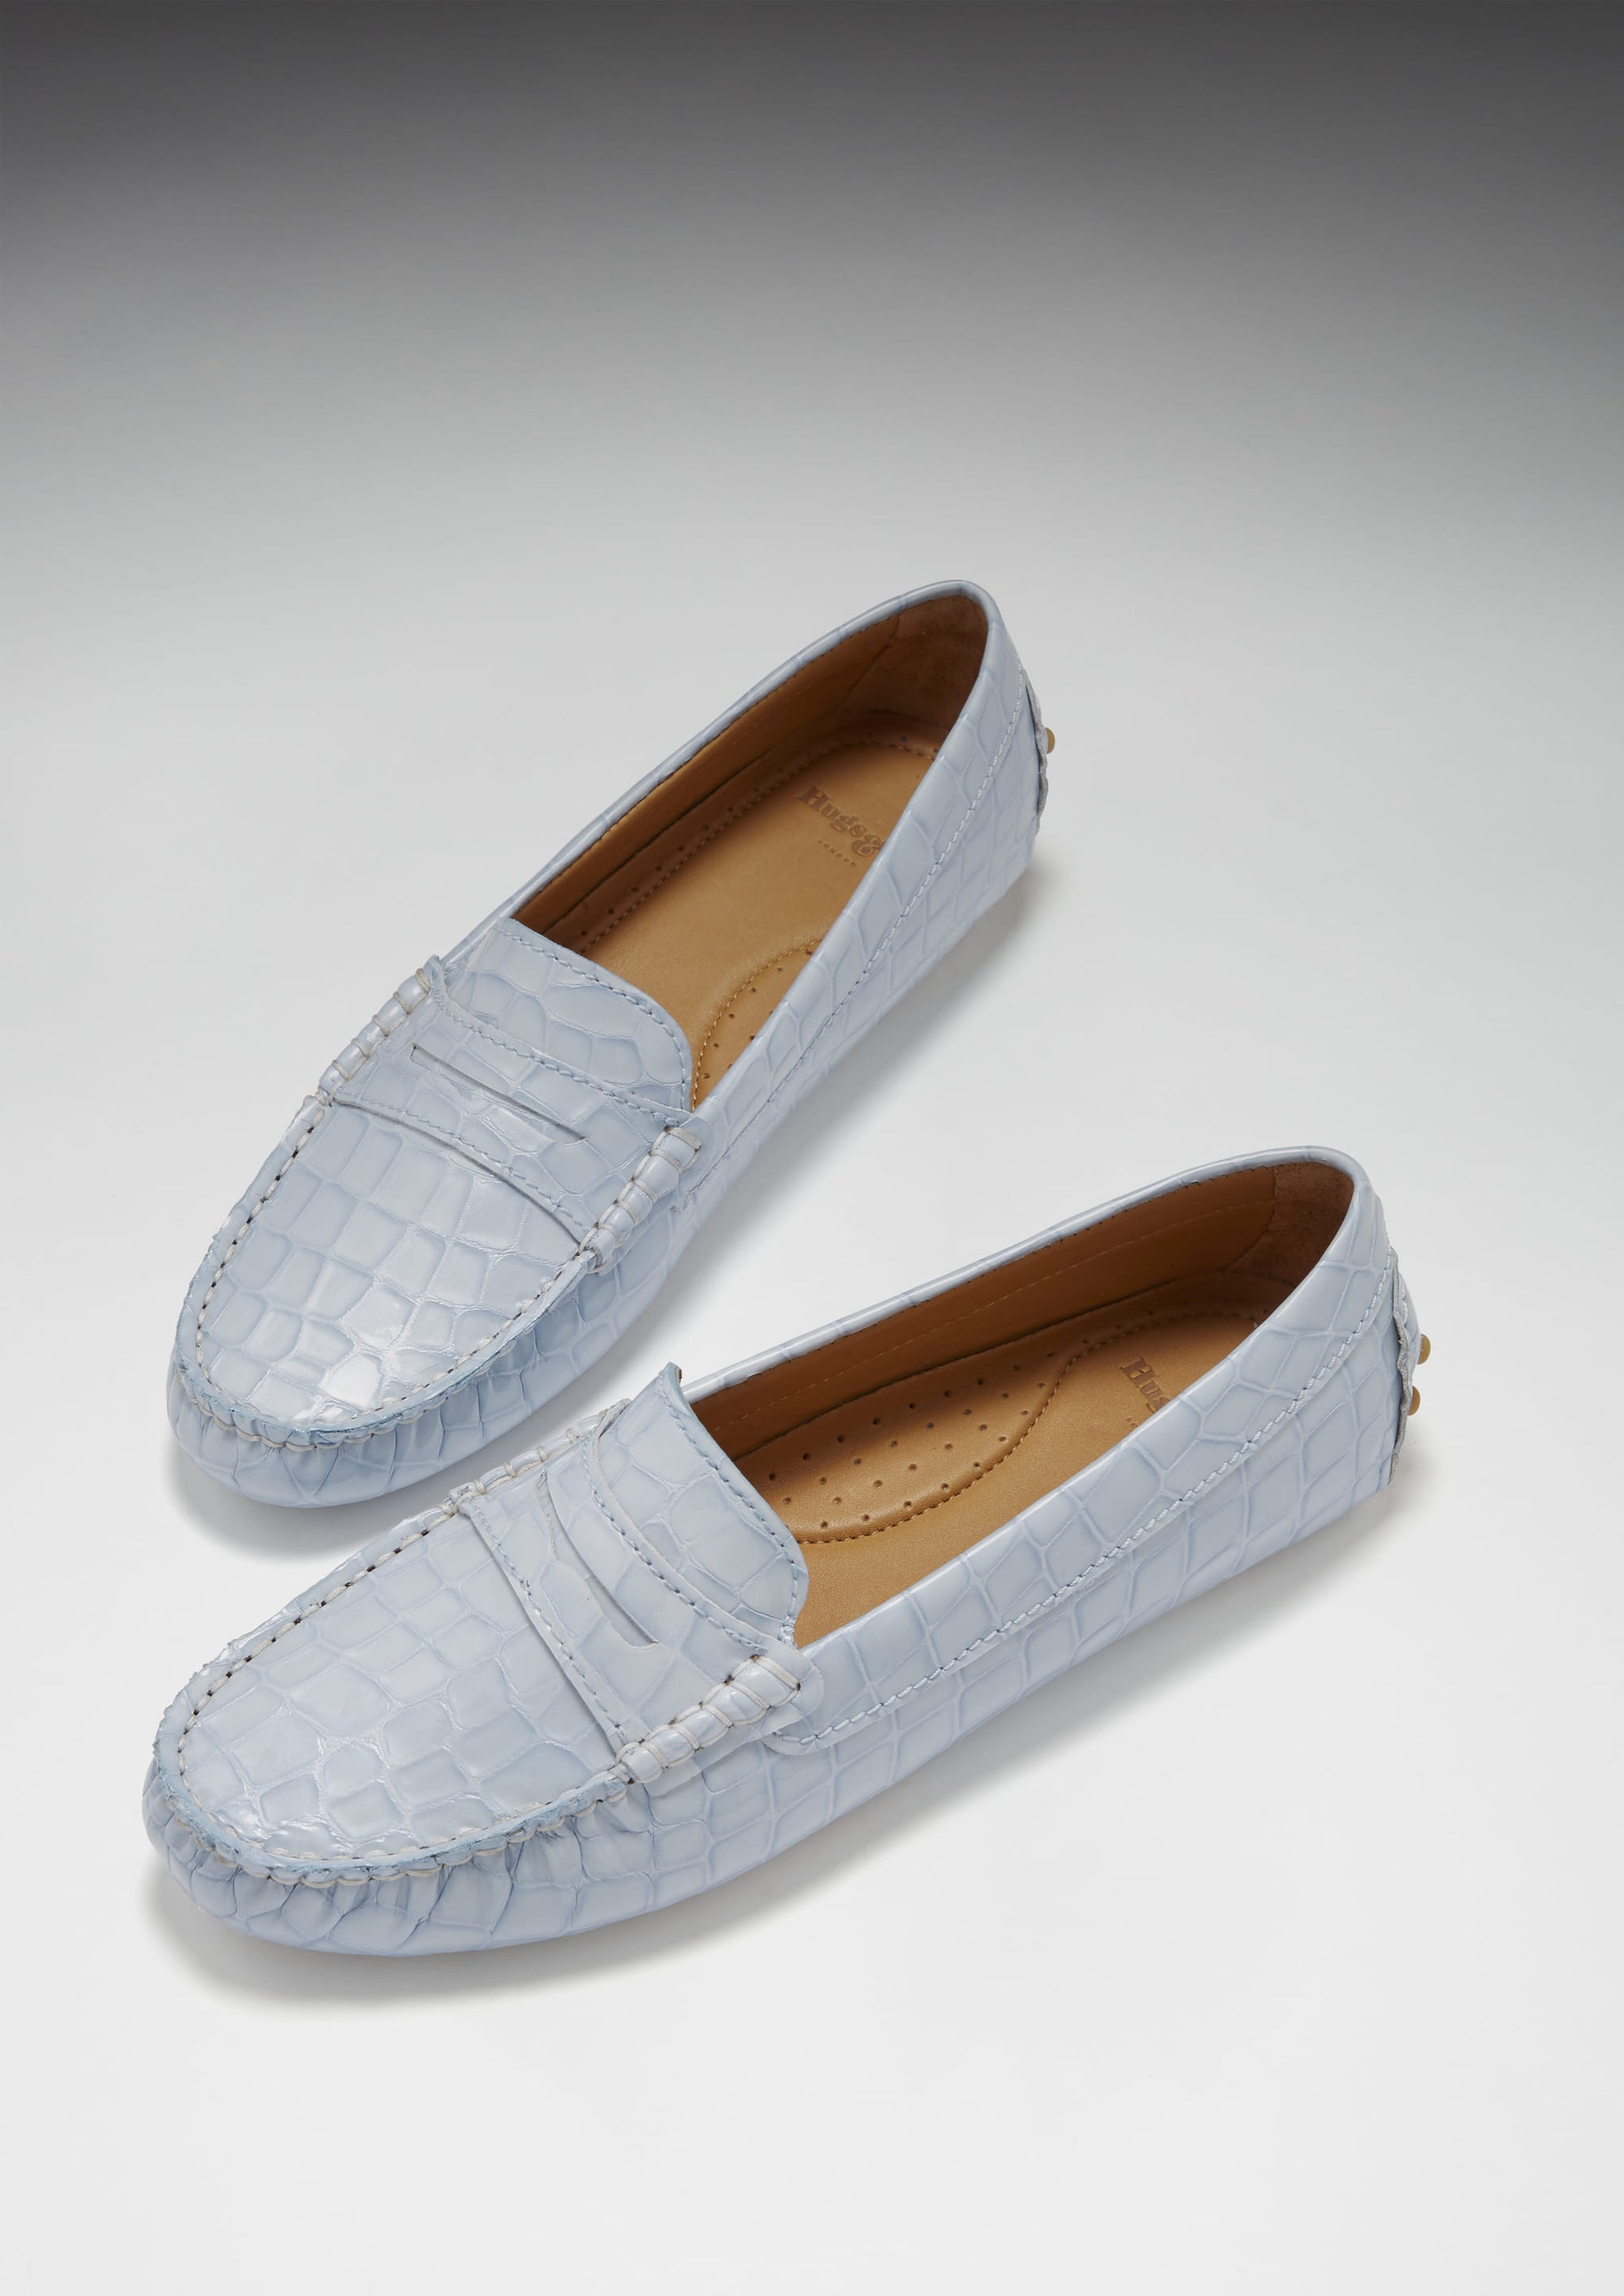 Women's Penny Driving Loafers, powder blue print patent leather